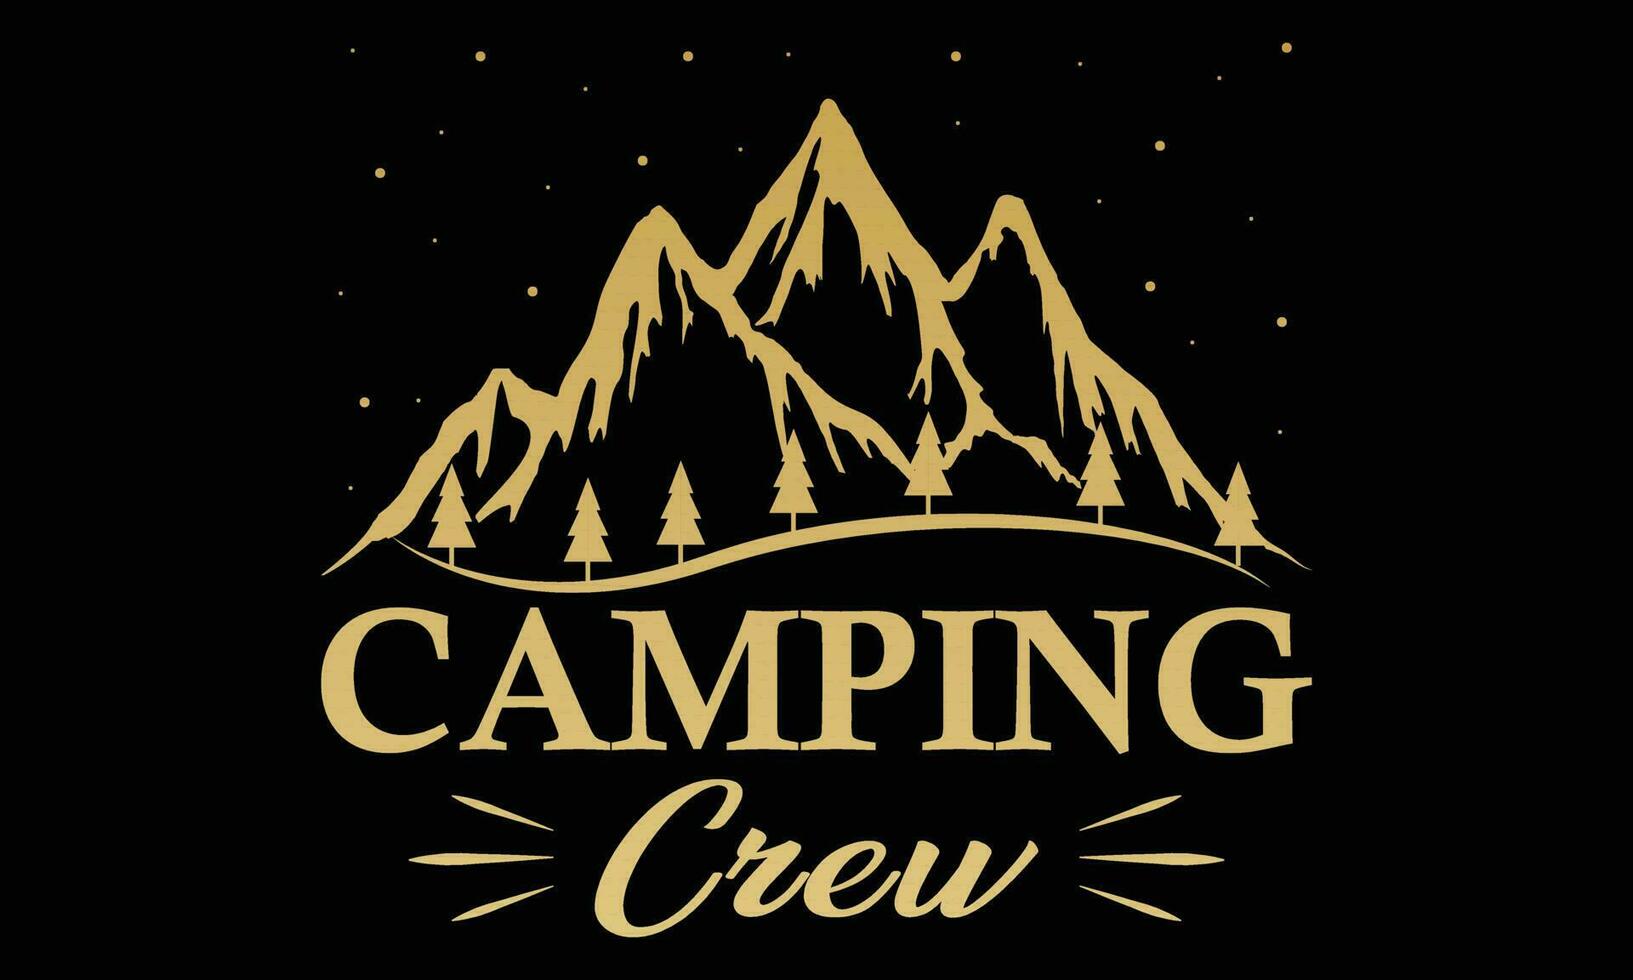 Camping Crew T shirt Design, Camping Vector. Mountain Vector, Graphic vector print for t shirt and background print design.